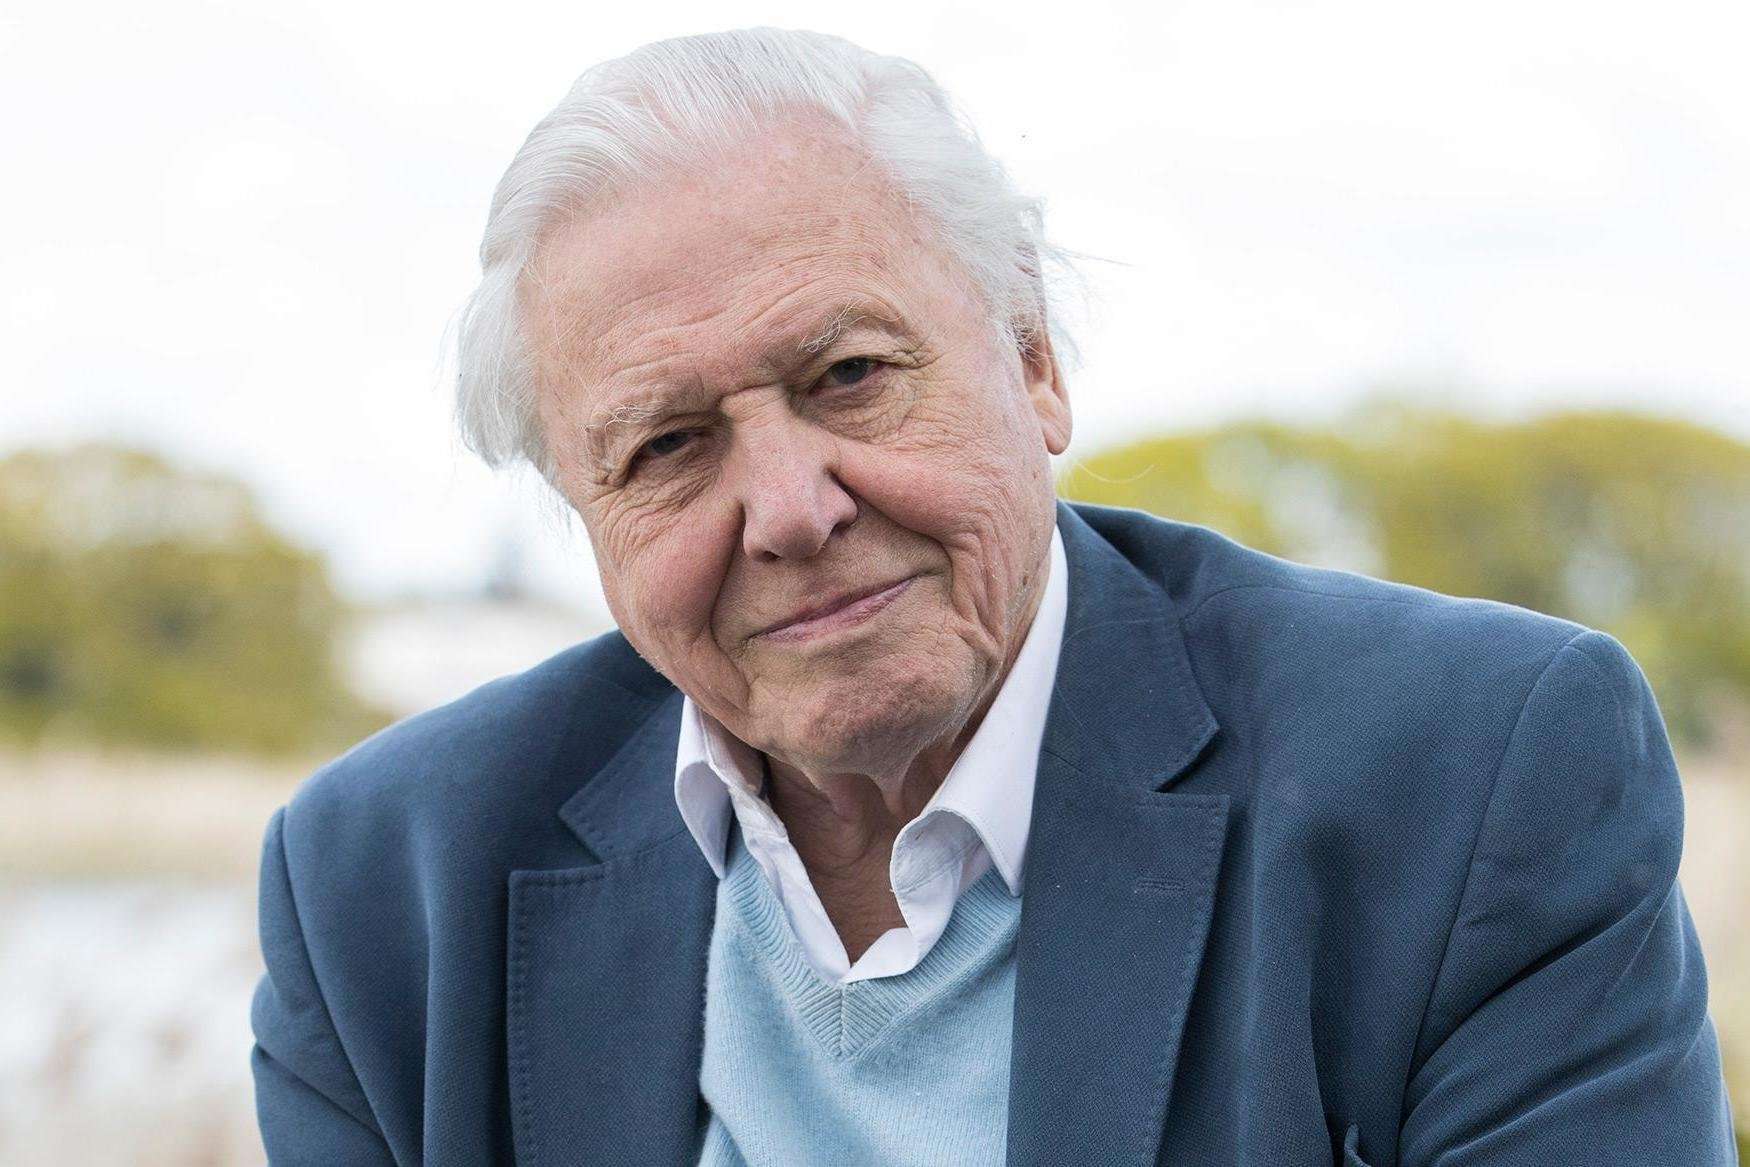 image for Watching David Attenborough documentaries just as good for you as mindfulness, study finds